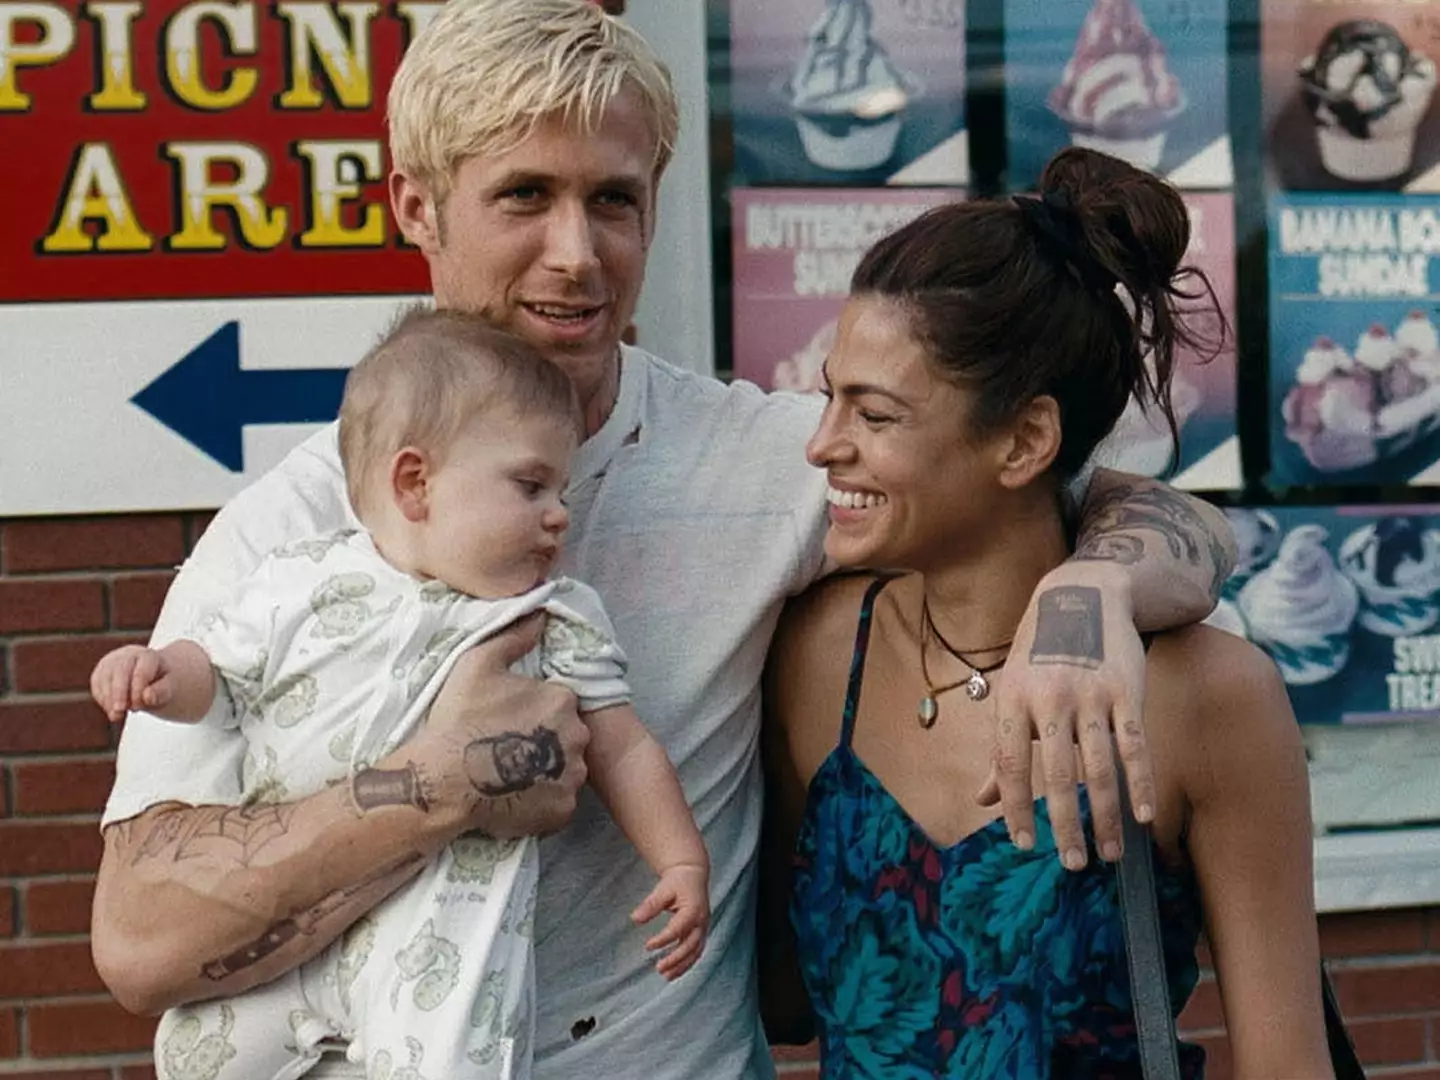 Ryan Gosling and Eva Mendes in A Place Beyond the Pines.